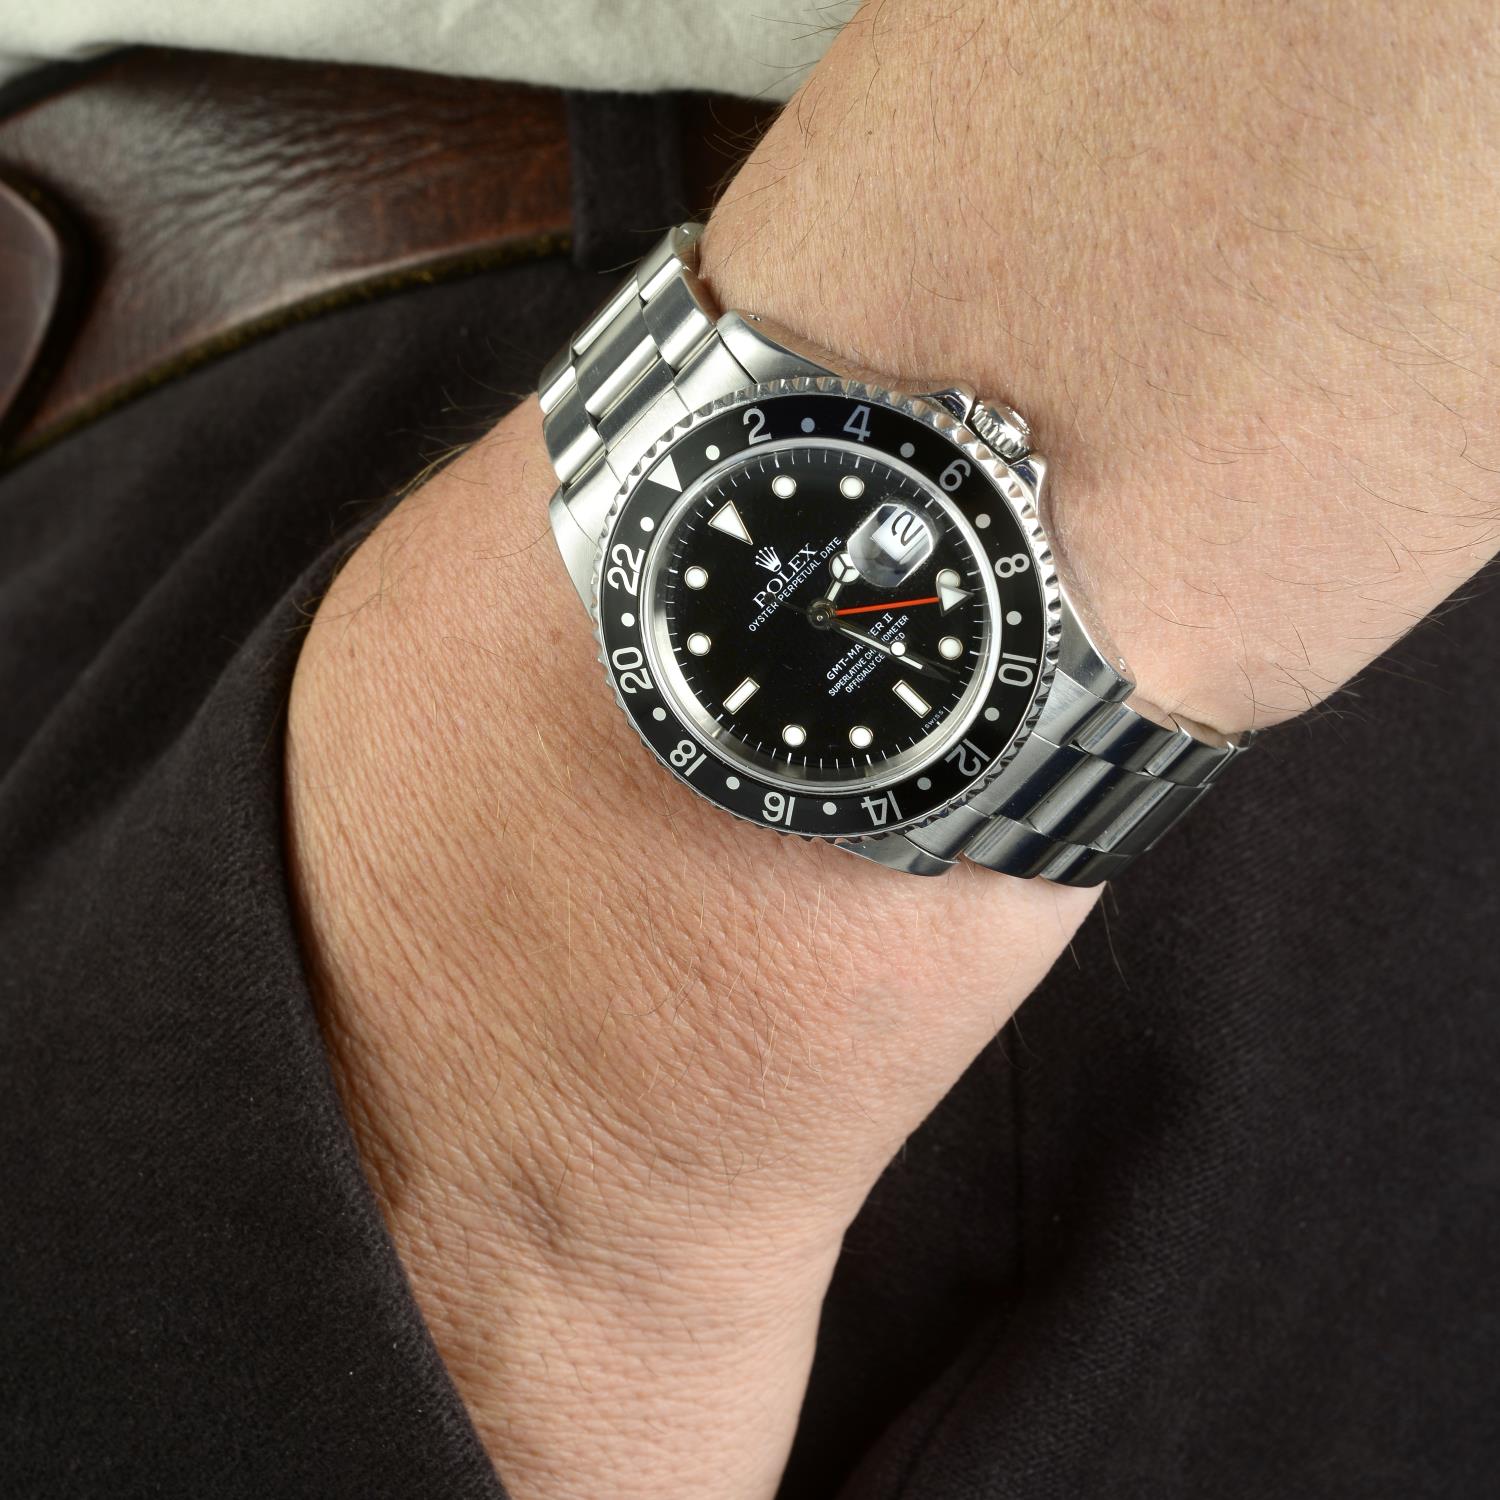 ROLEX - a gentleman's Oyster Perpetual Date GMT Master II bracelet watch. - Image 3 of 3